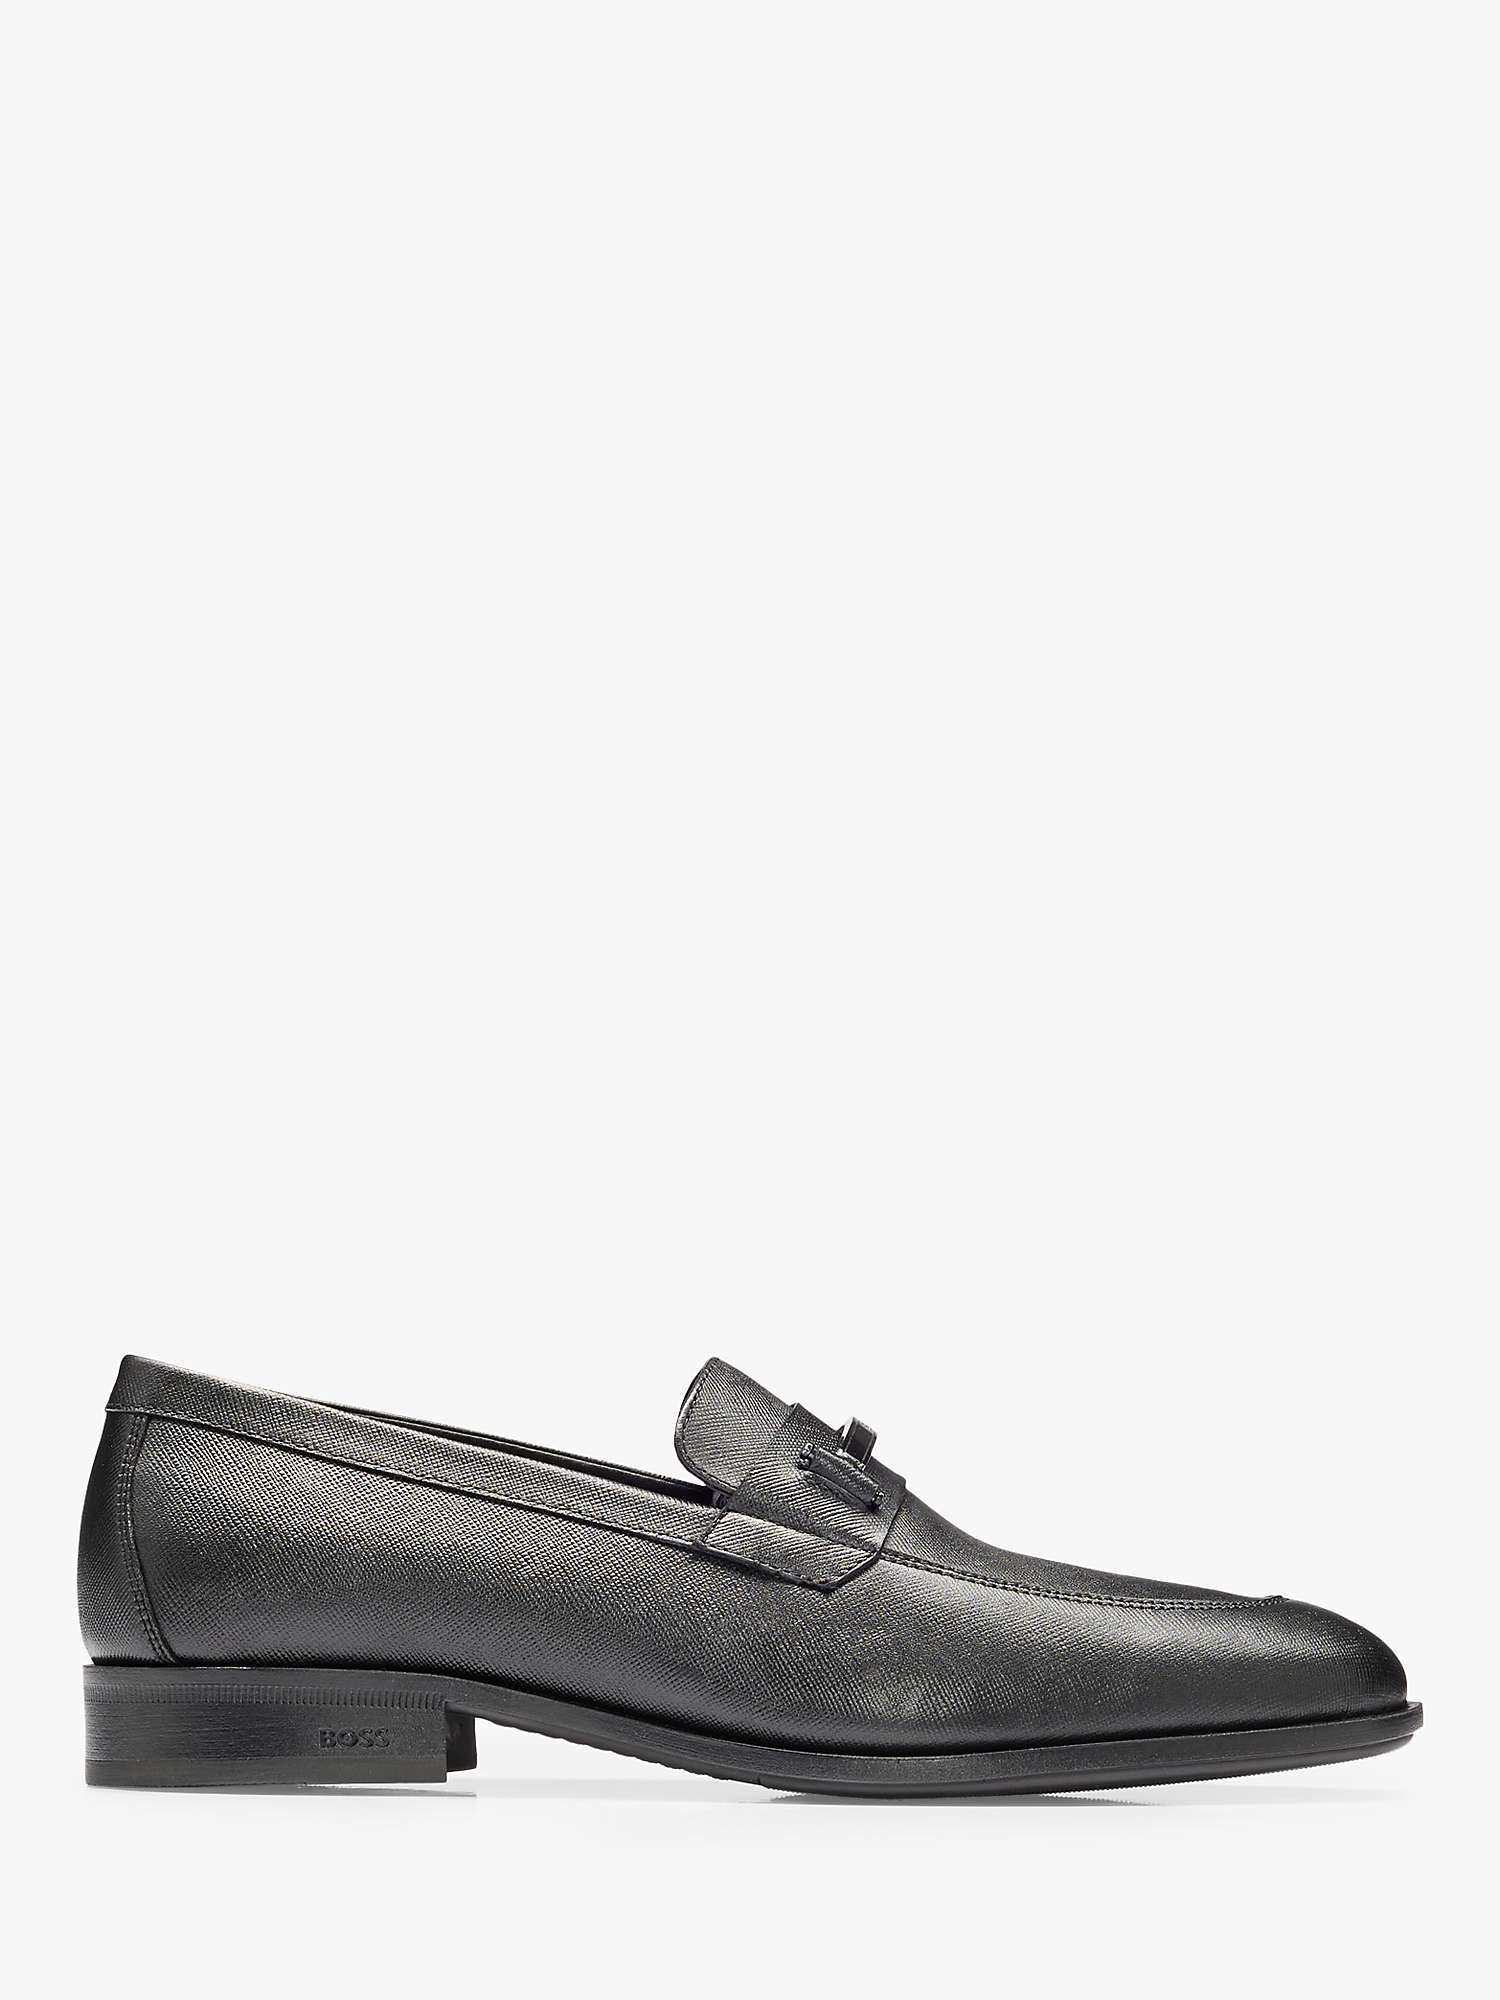 Buy BOSS Colby Loafers Online at johnlewis.com